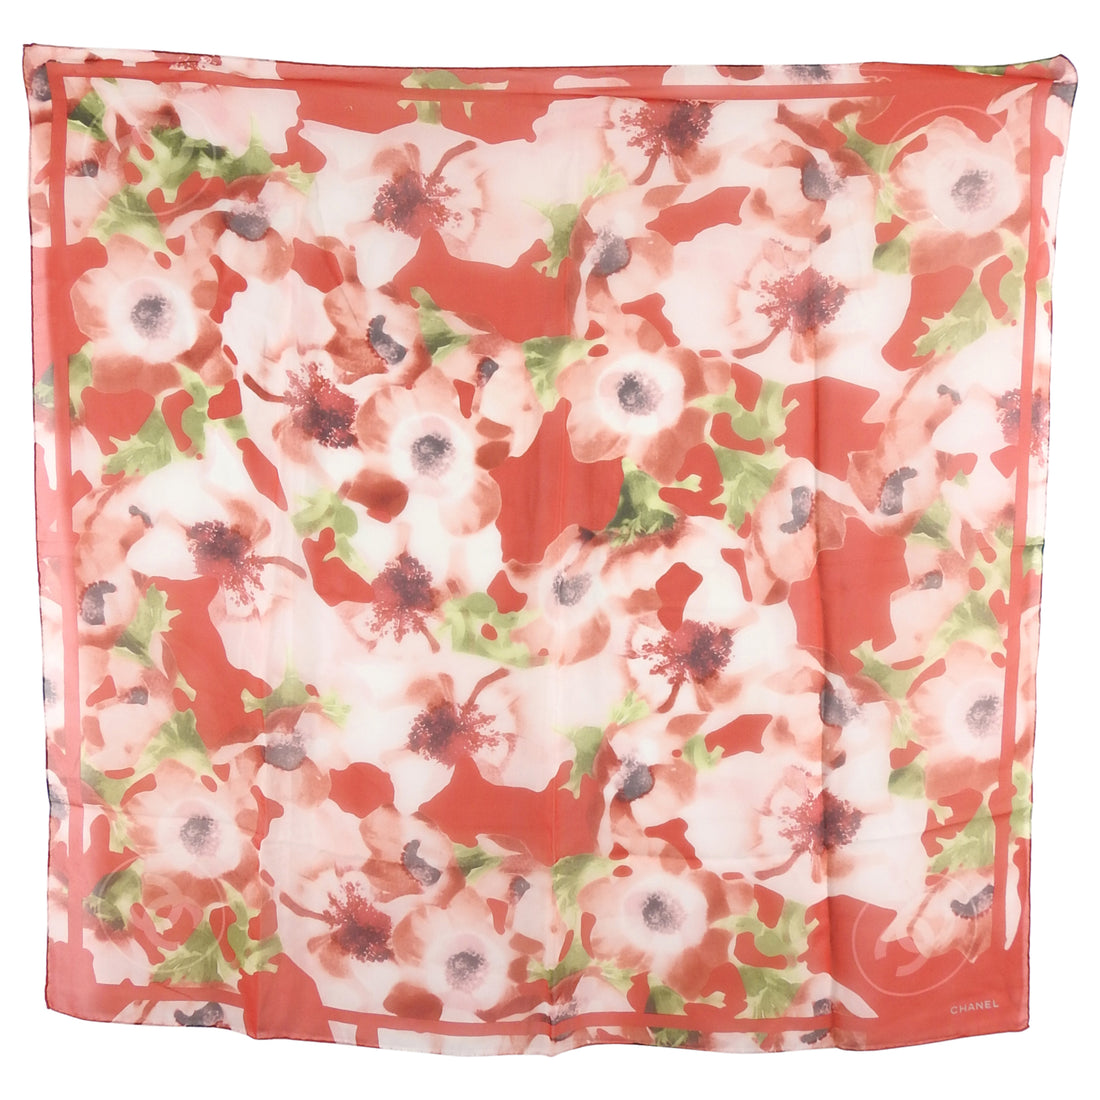 Chanel Red Camelia Flower Photoprint Sheer Silk Chiffon Scarf – I MISS YOU  VINTAGE